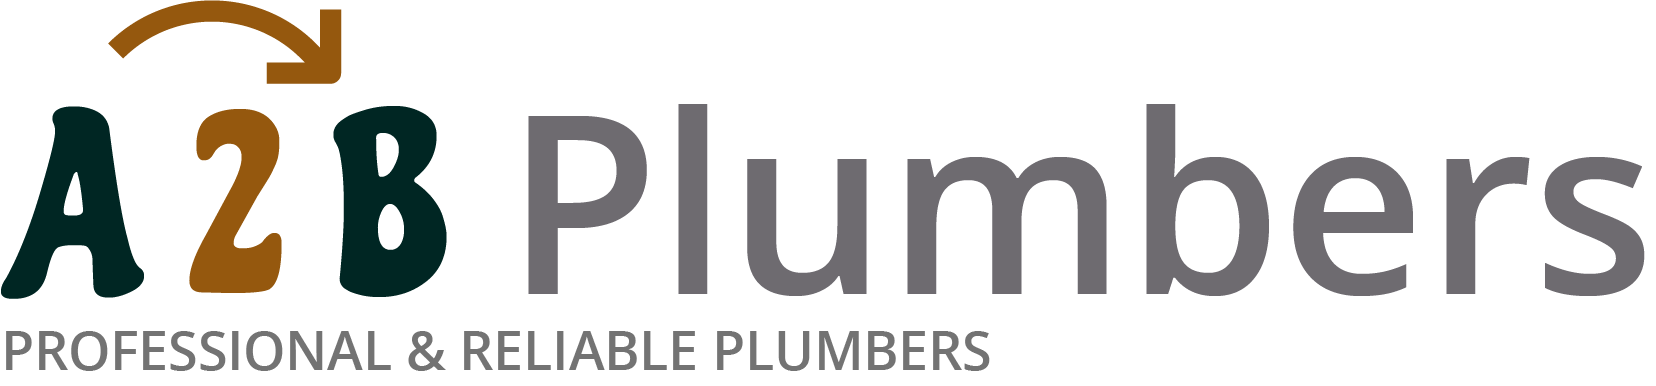 If you need a boiler installed, a radiator repaired or a leaking tap fixed, call us now - we provide services for properties in Ealing and the local area.